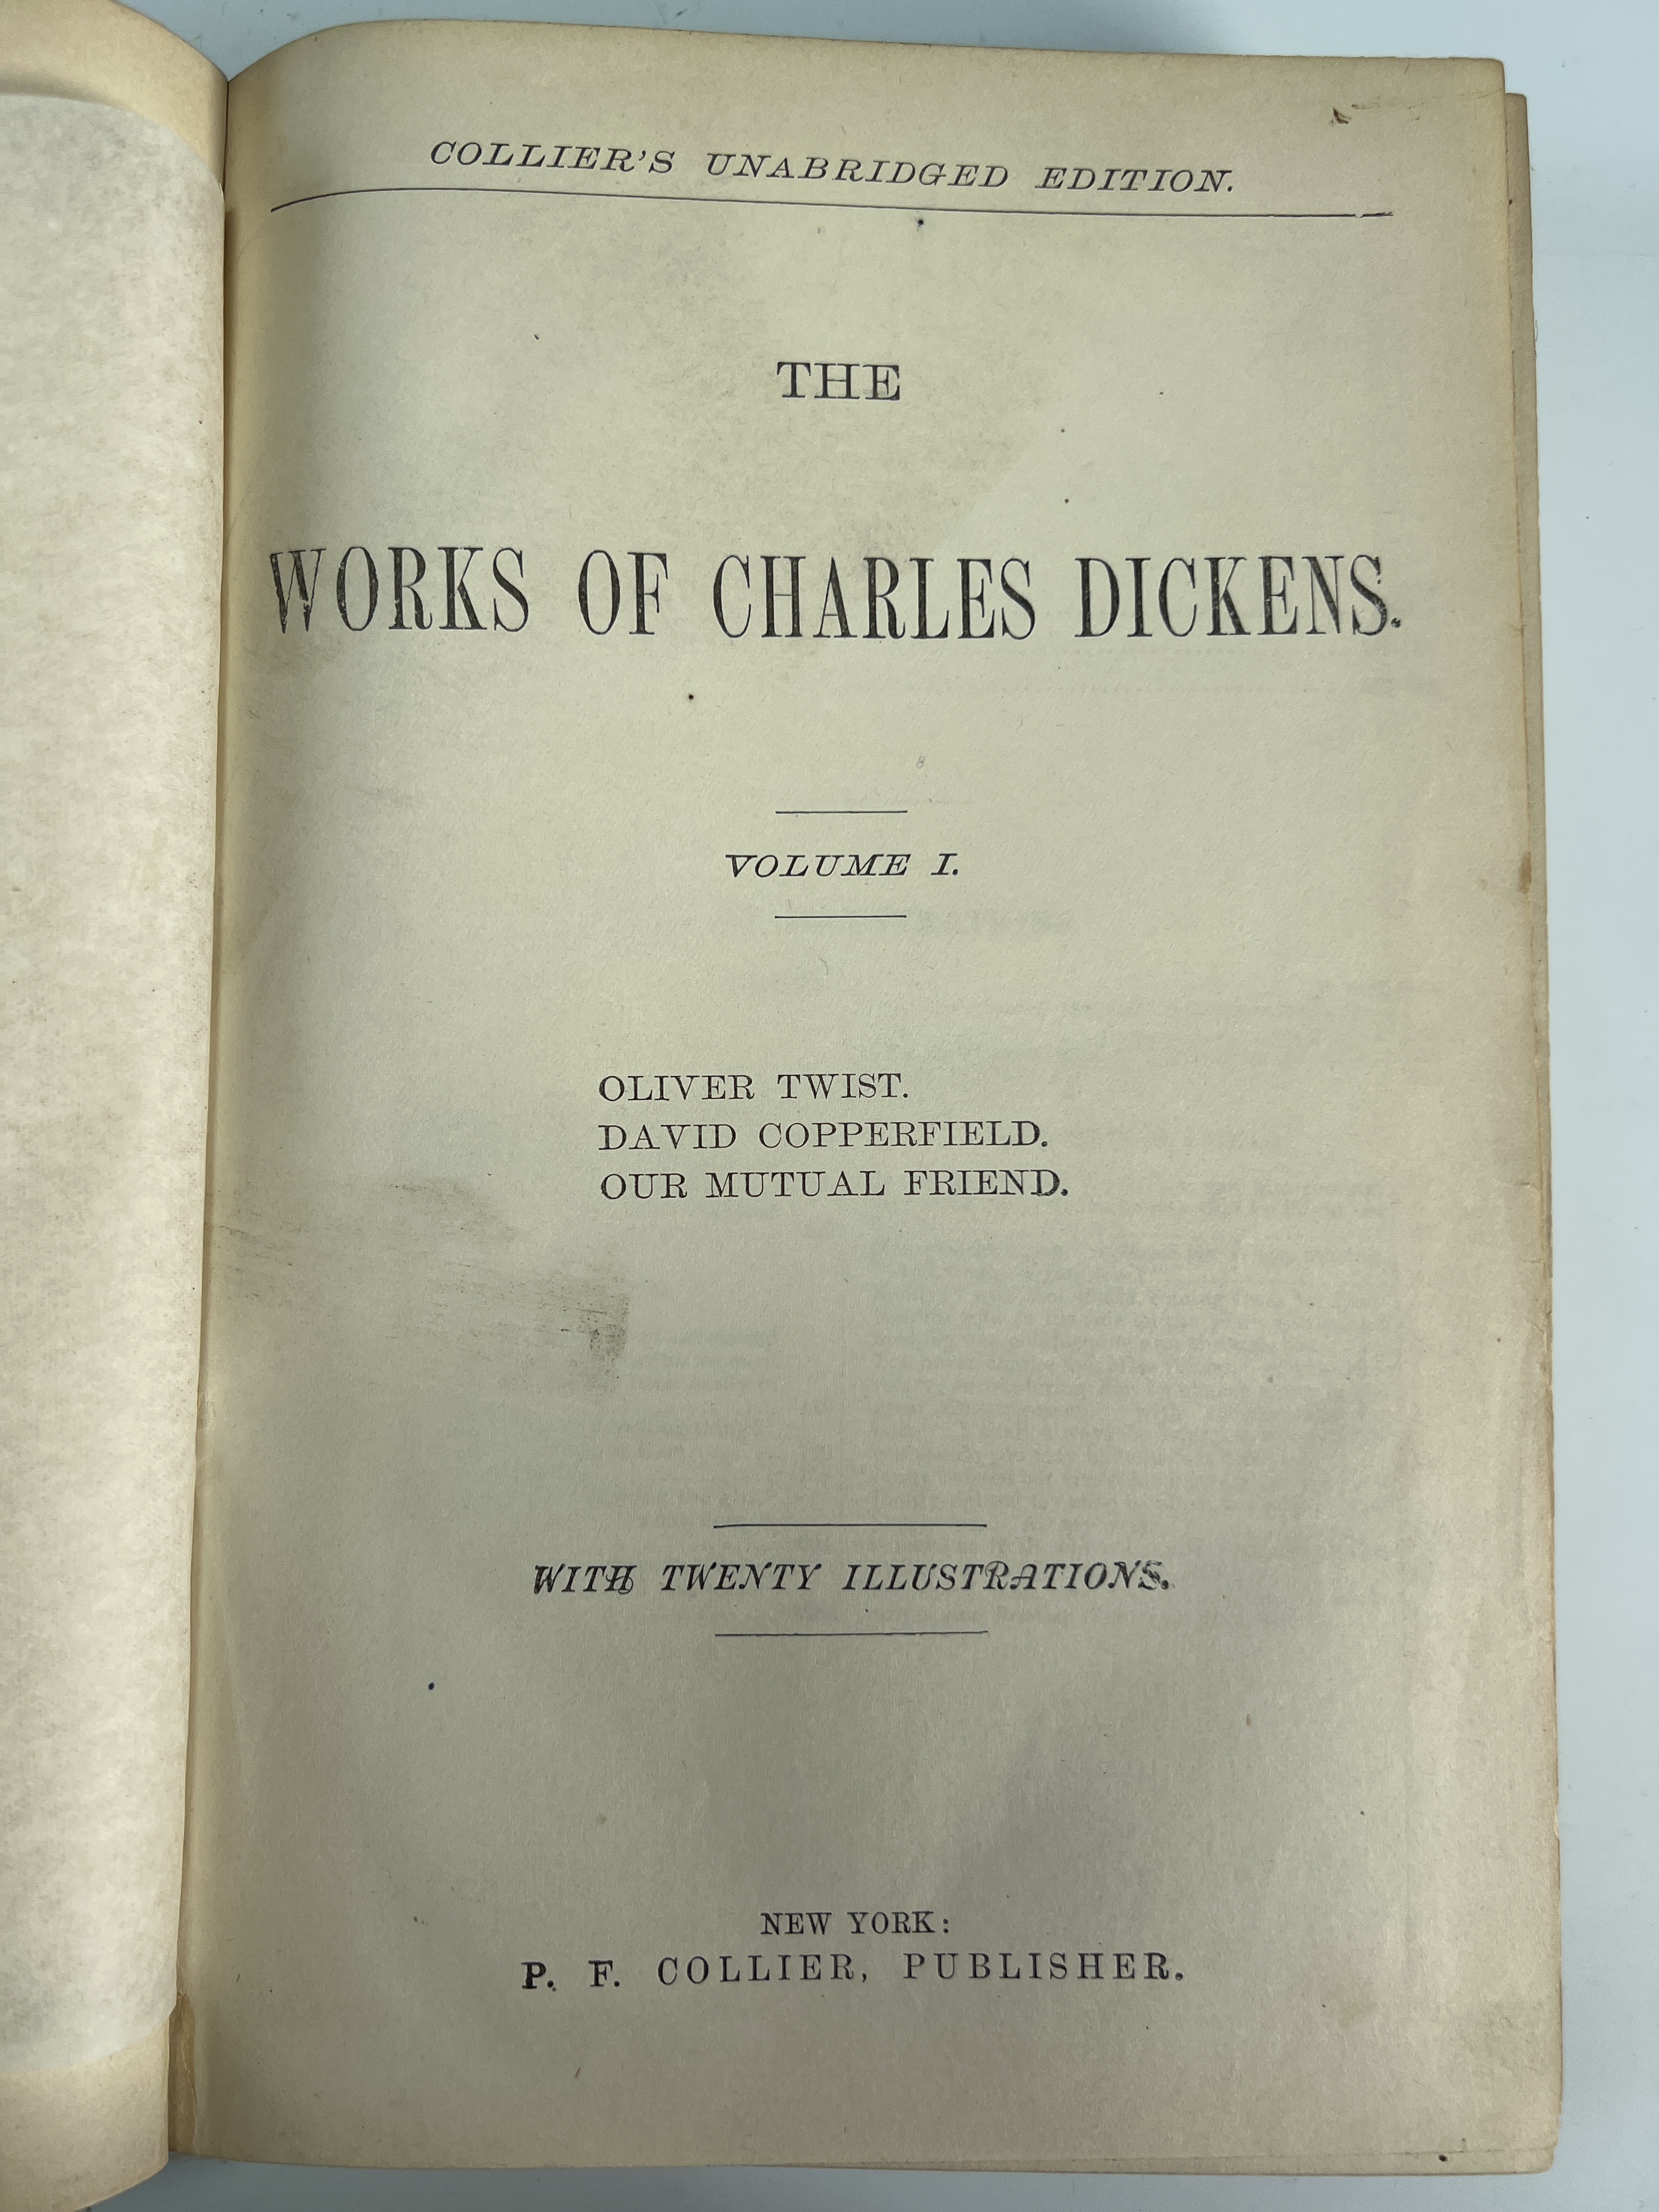 6 Vol Colliers Unabridged Ed The Works Of Charles Dickens image 4